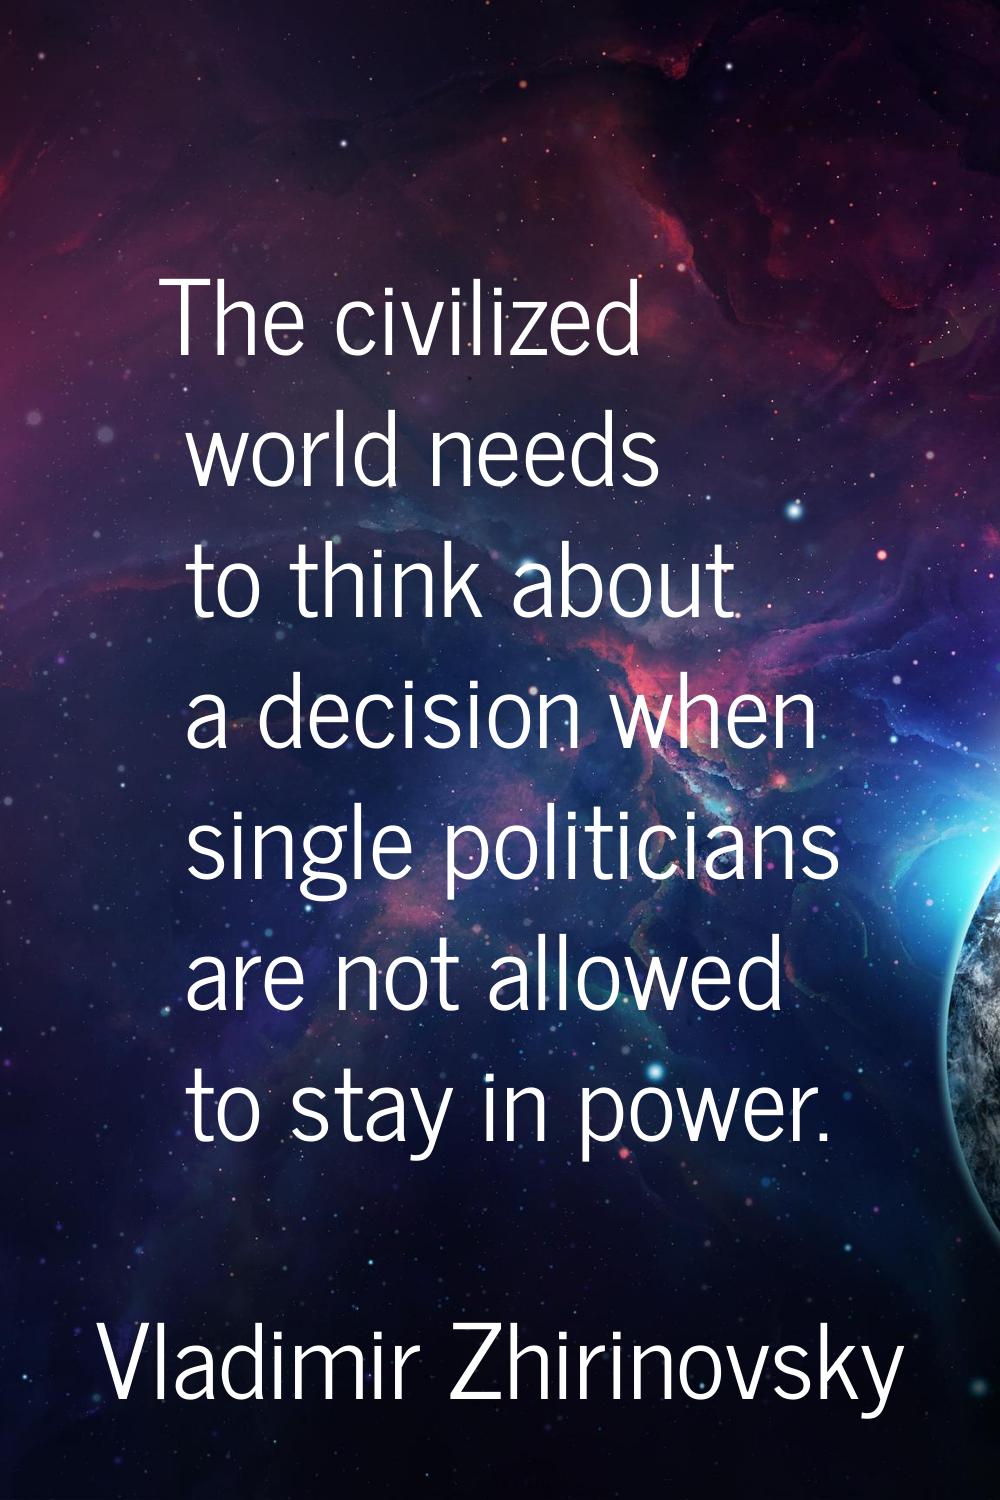 The civilized world needs to think about a decision when single politicians are not allowed to stay